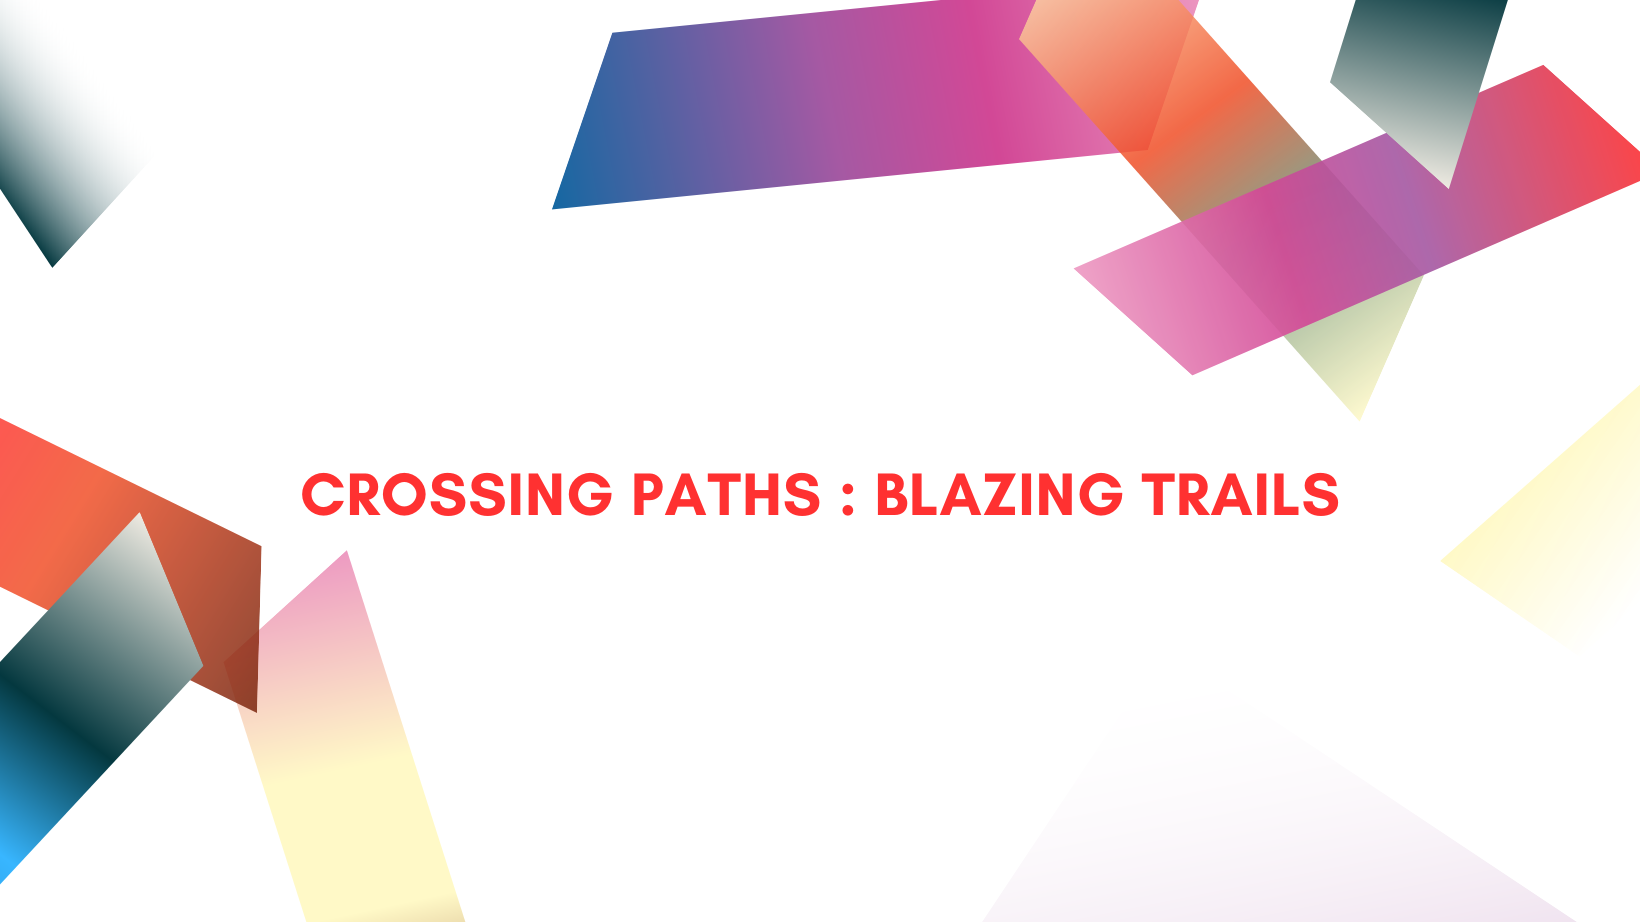 About Crossing Paths : Blazing Trails